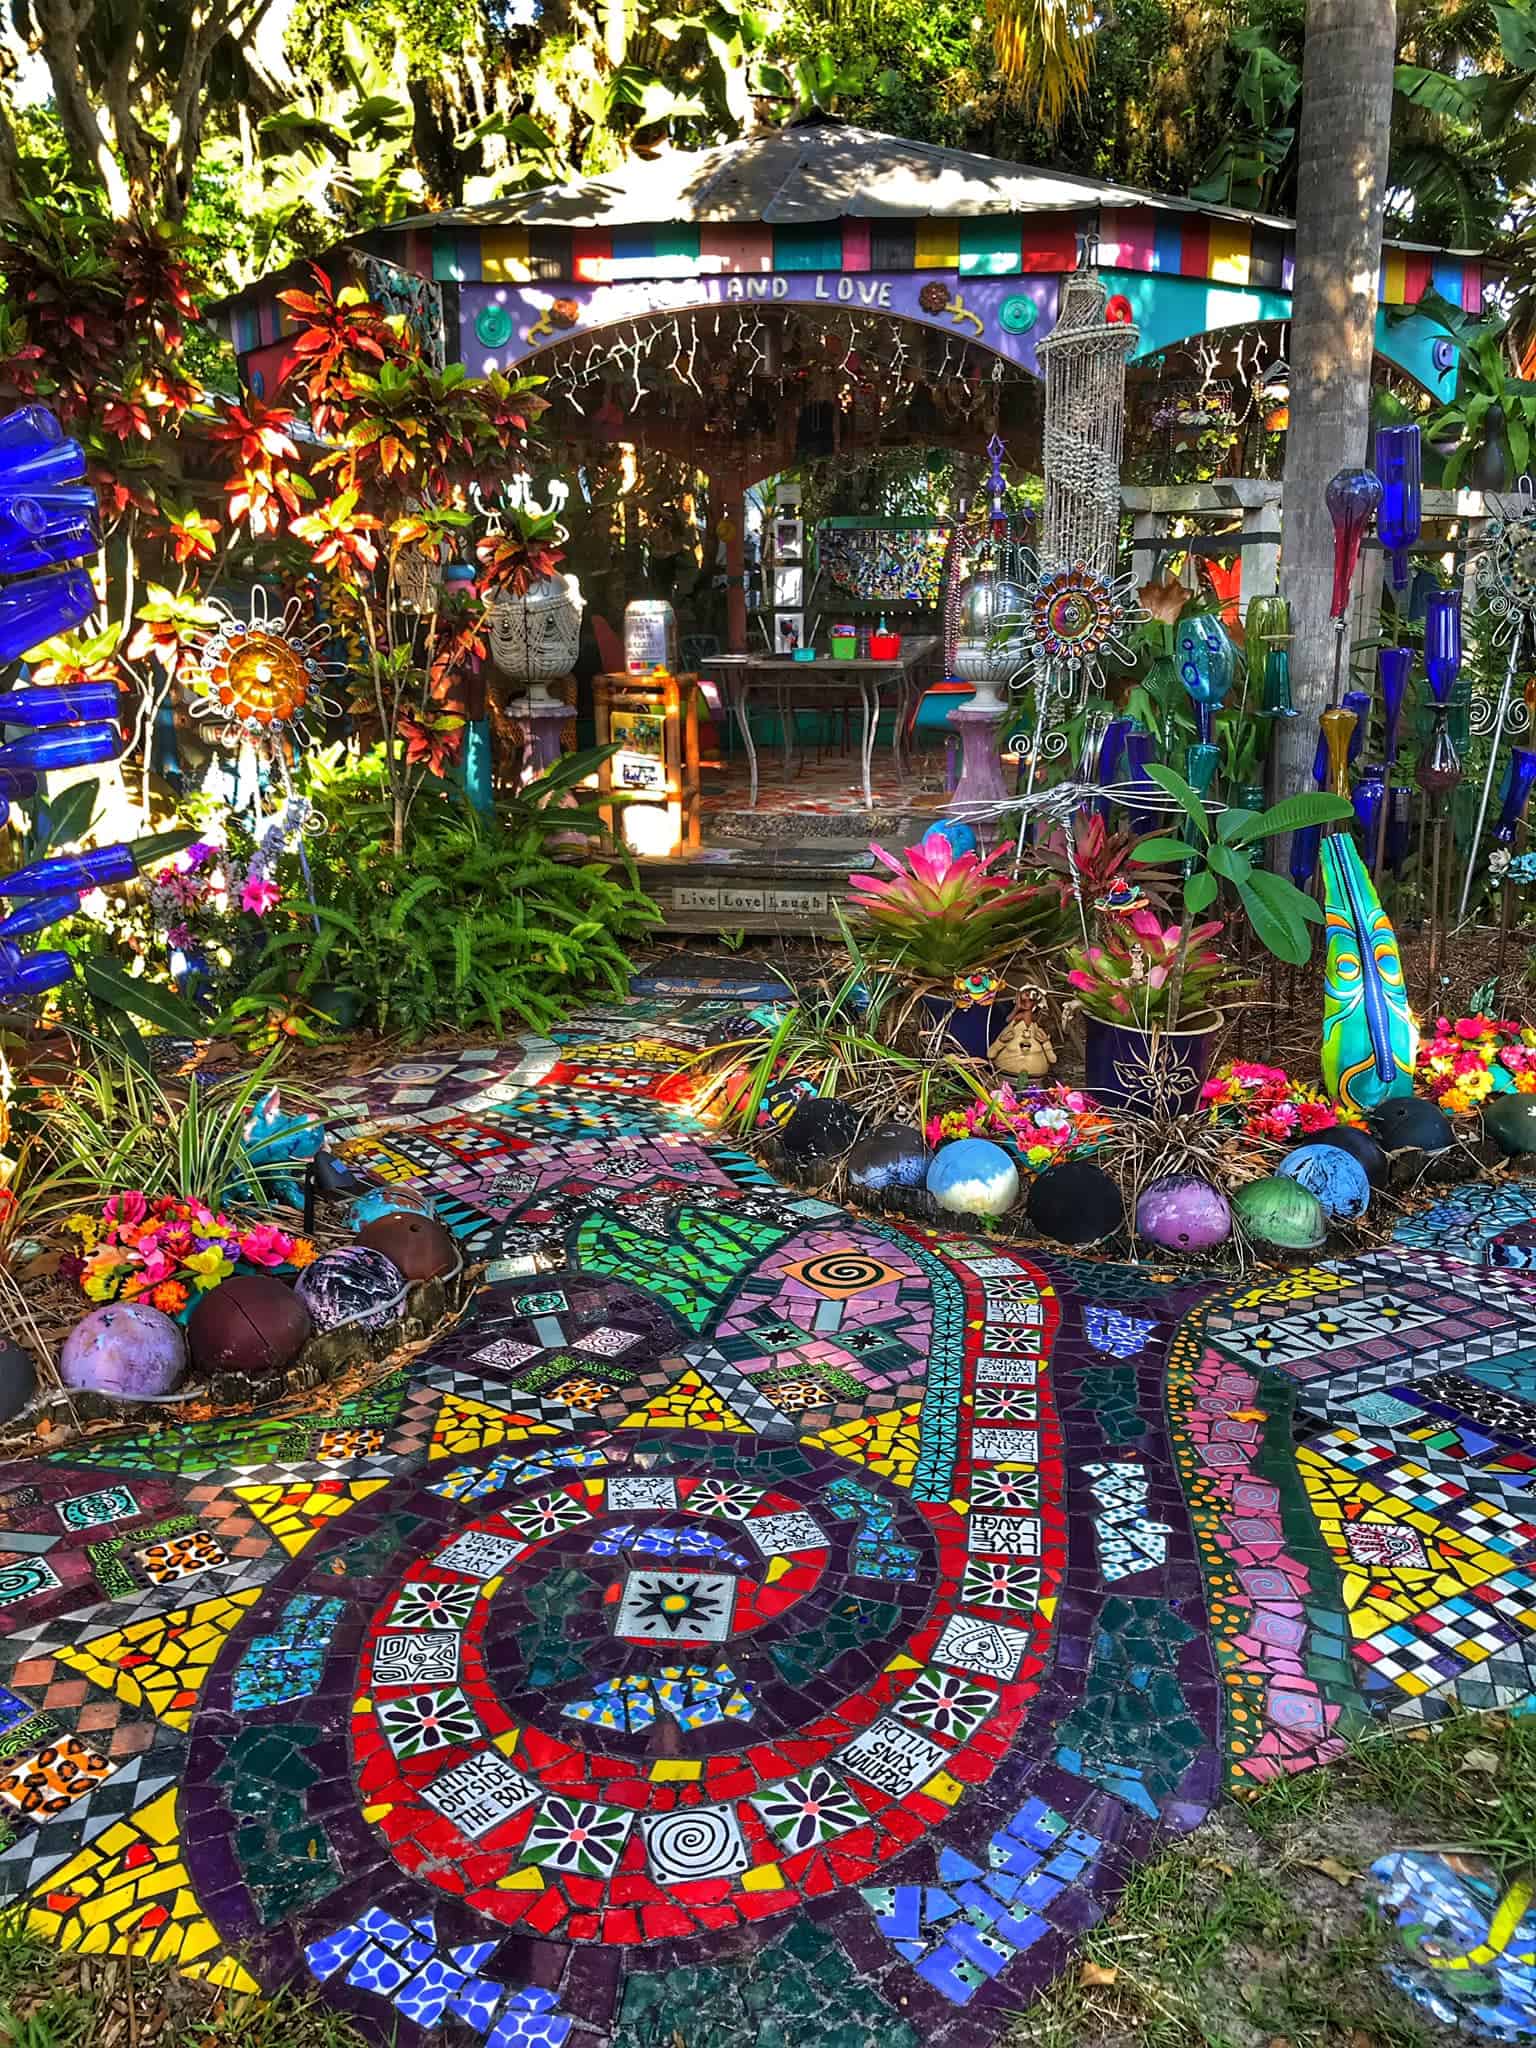 Outdoor portion of Whimzeyland. Brightly colored tiles make a swirl path, lots of ornate sculptures, bowling balls, and other piece hang from trees and are covering the ground